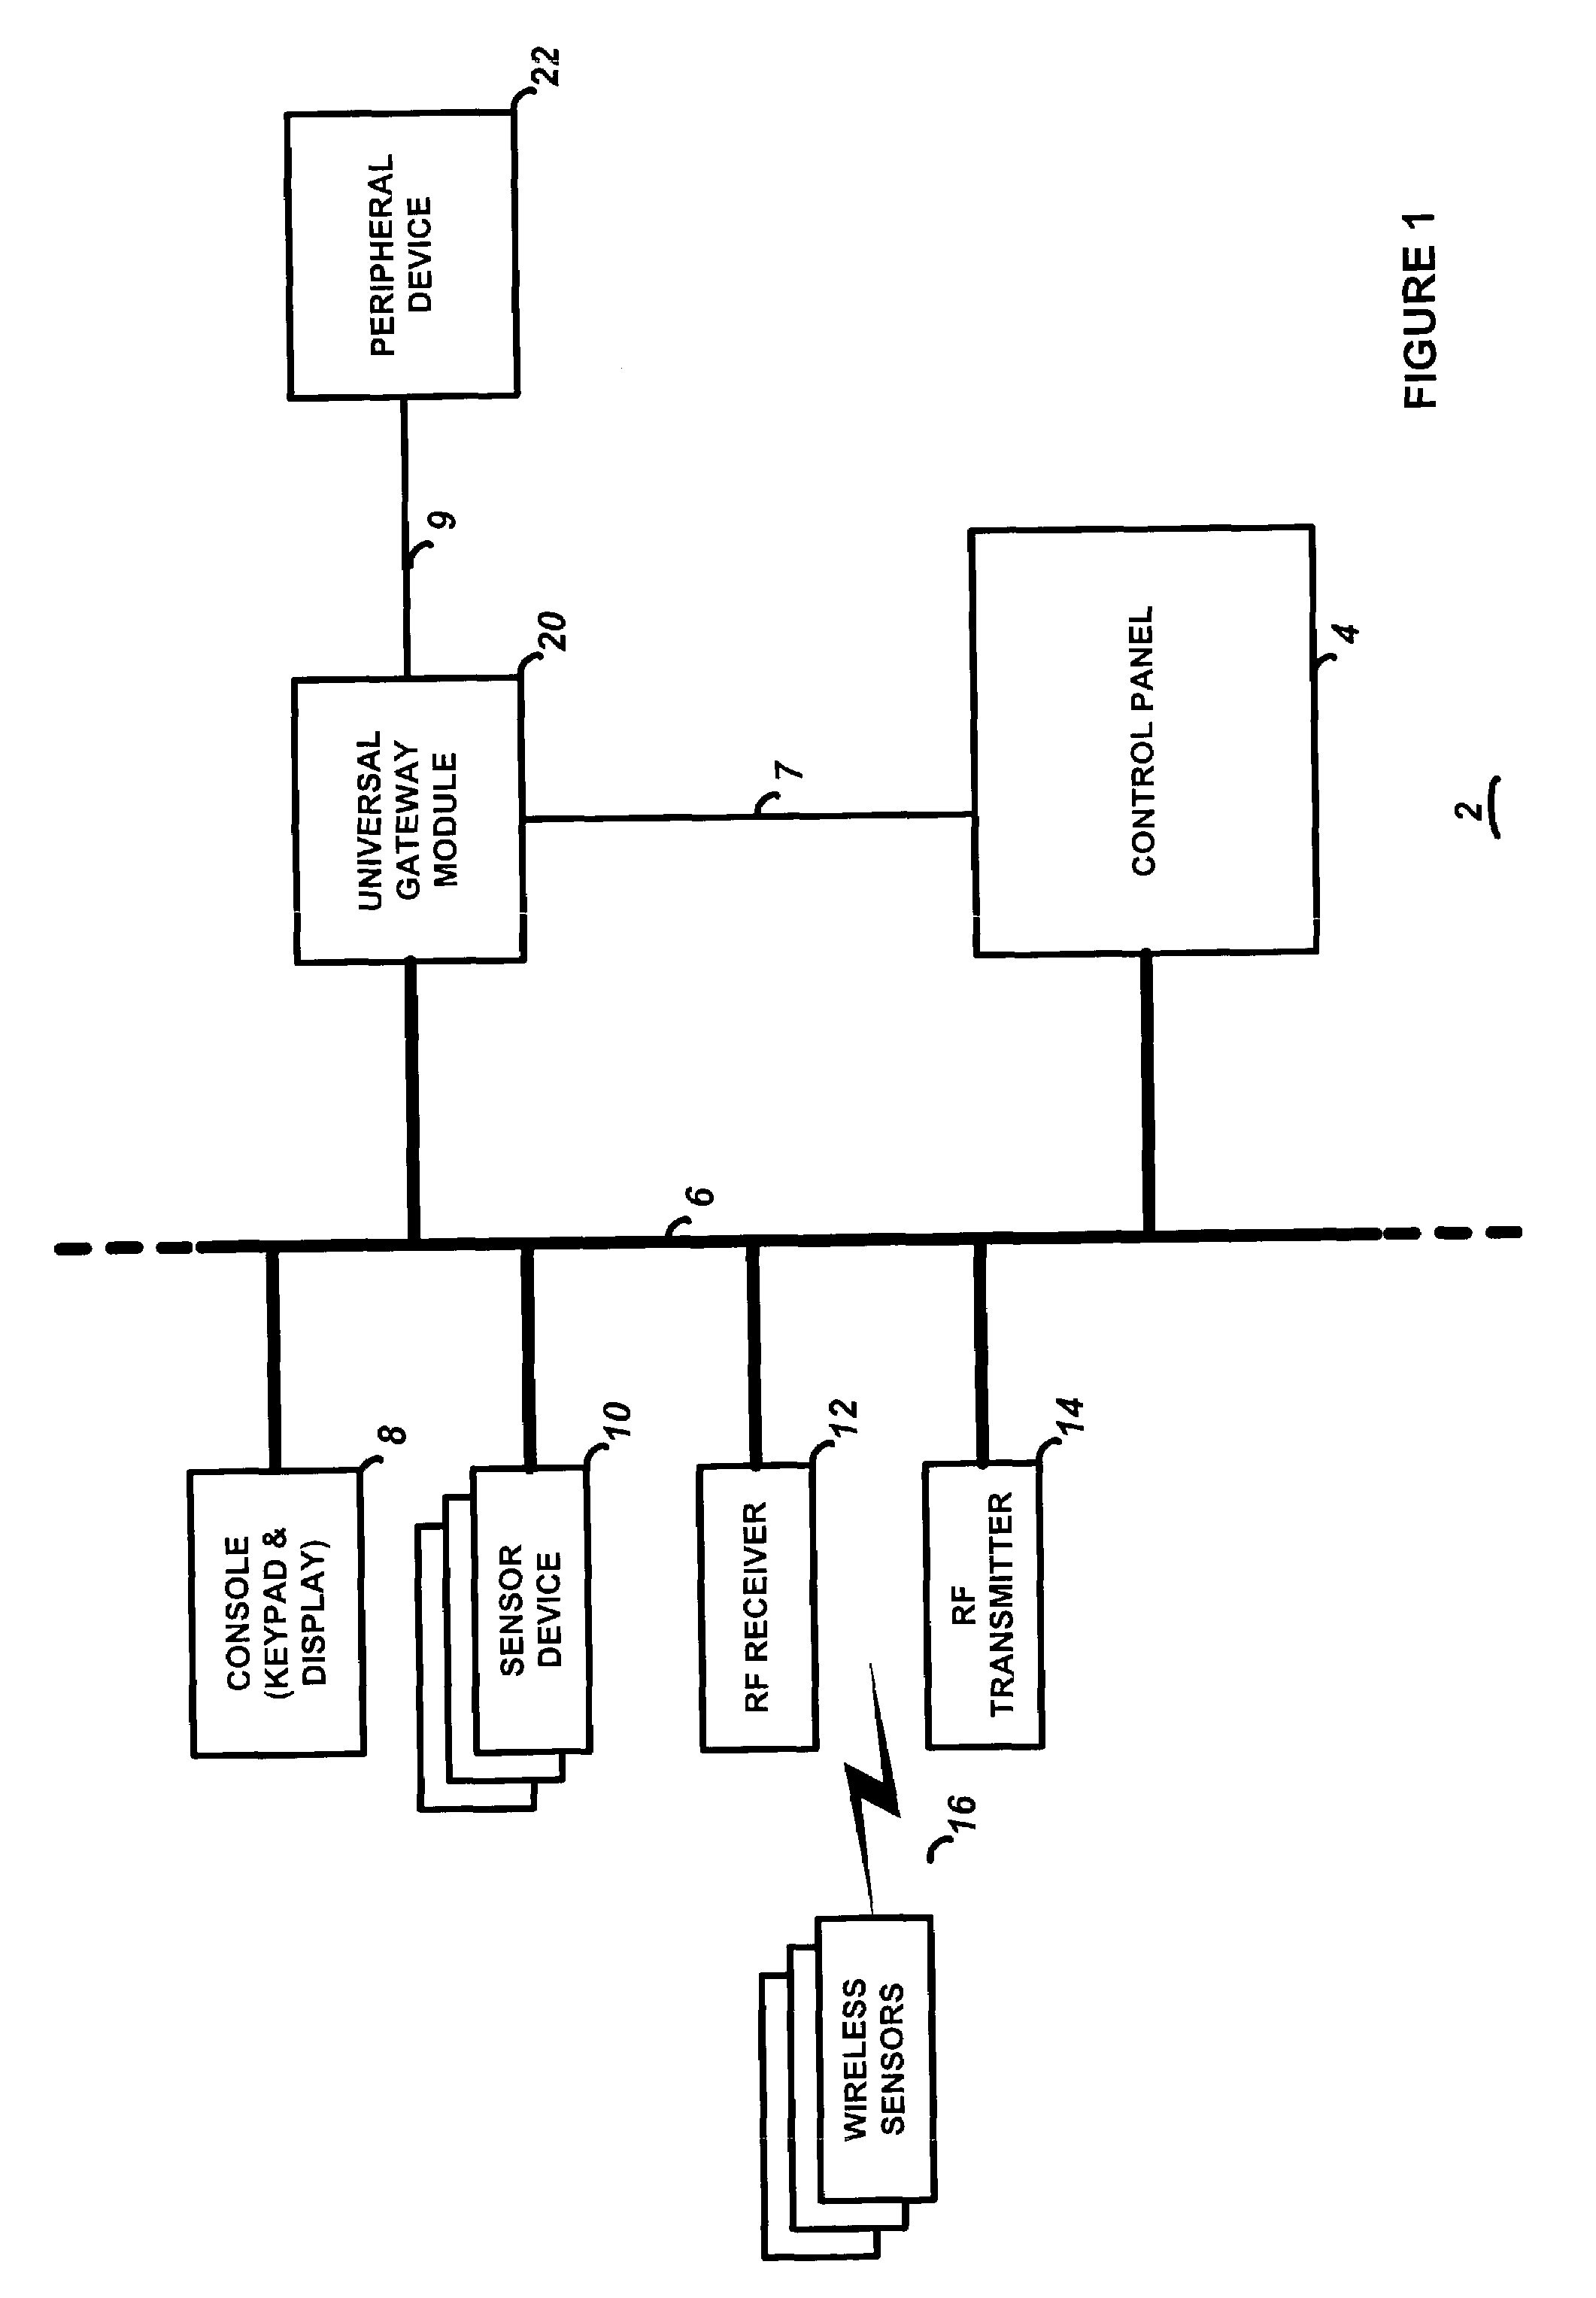 Universal gateway module for interfacing a security system control to external peripheral devices